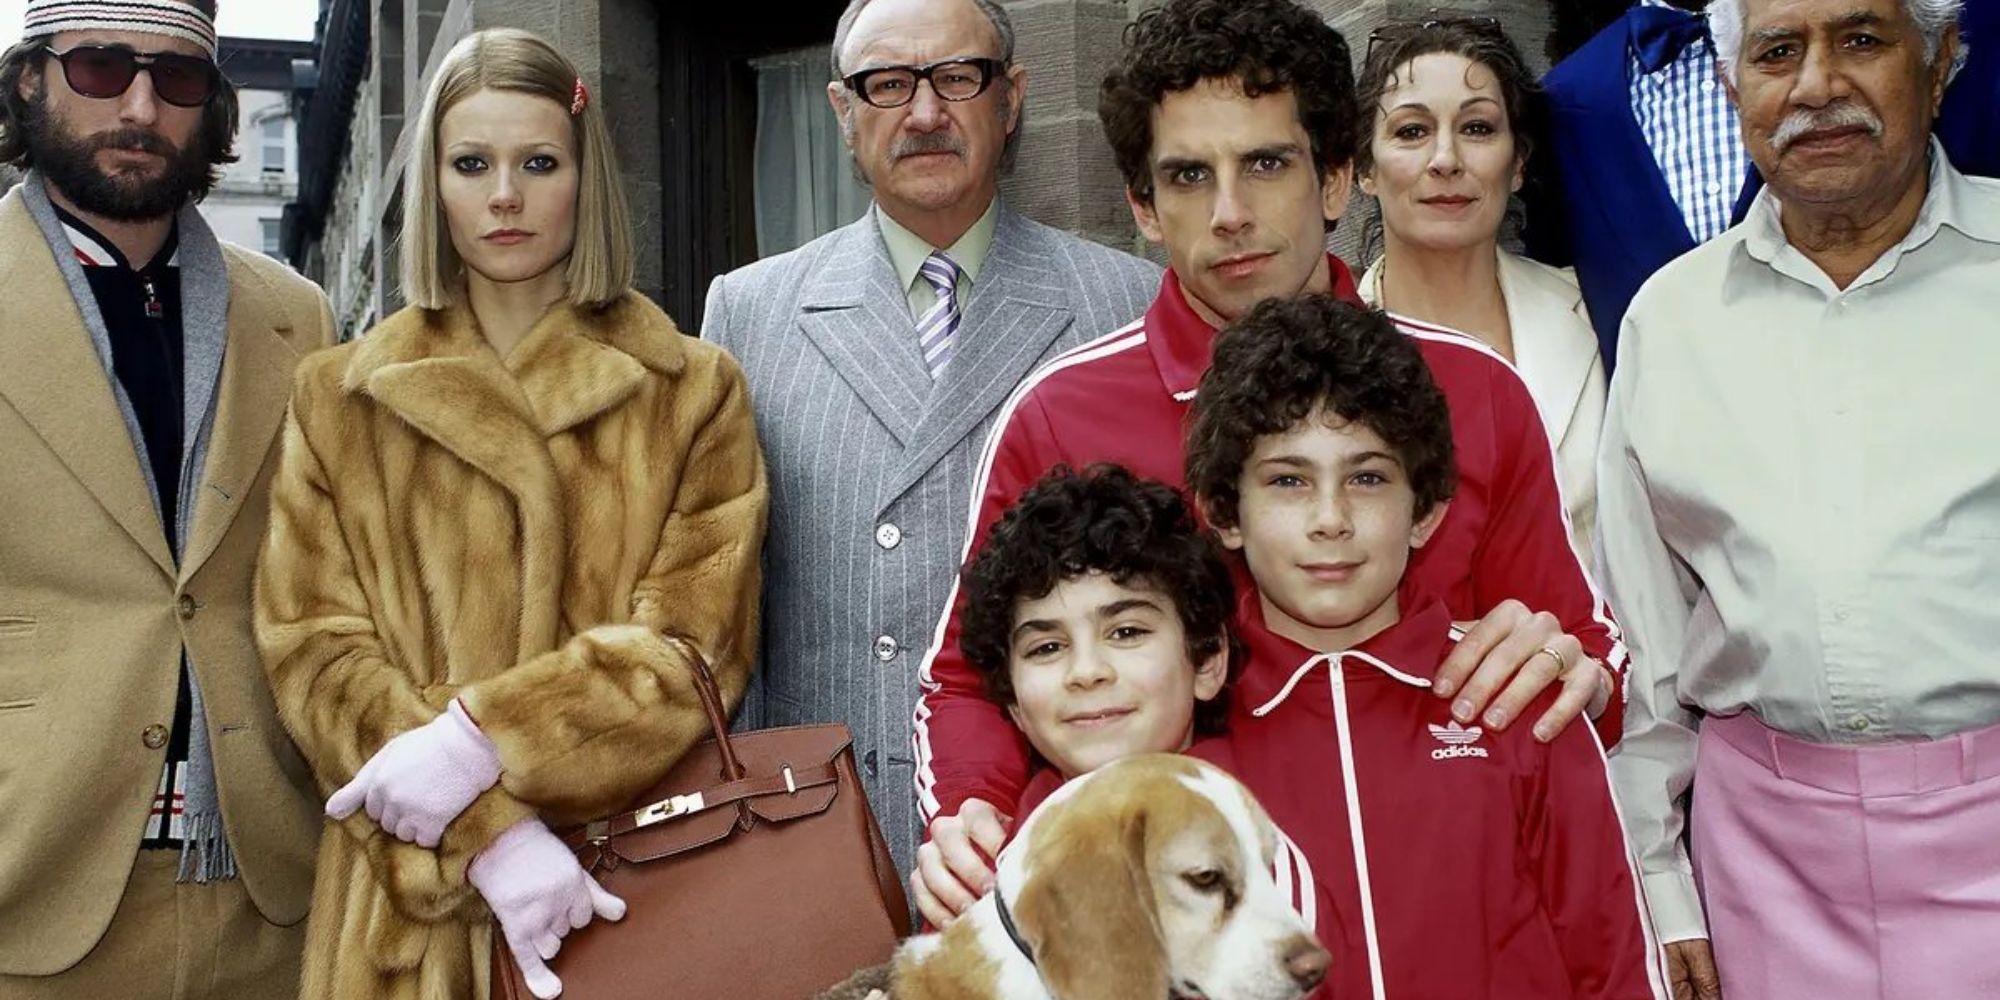 The cast of The Royal Tenenbaums’ 